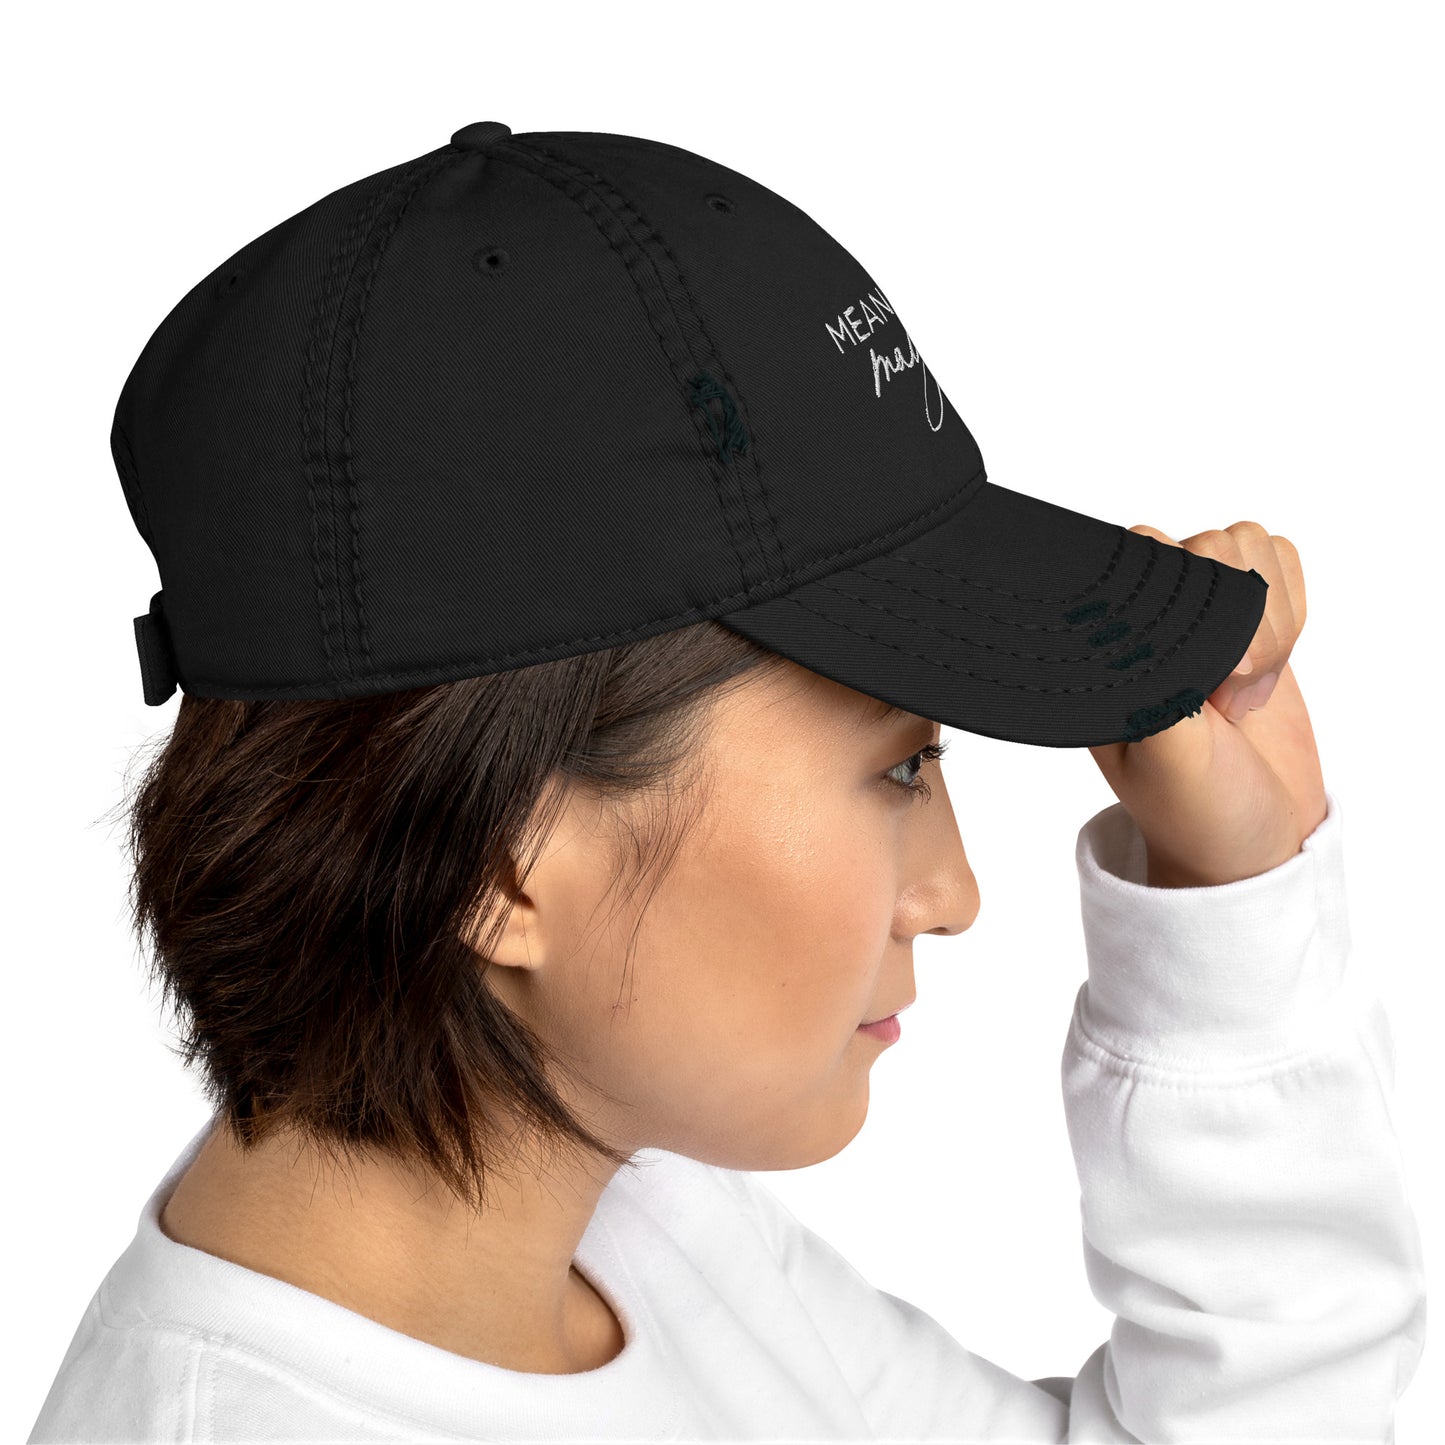 The Meant for Magic Distressed Dad Hat